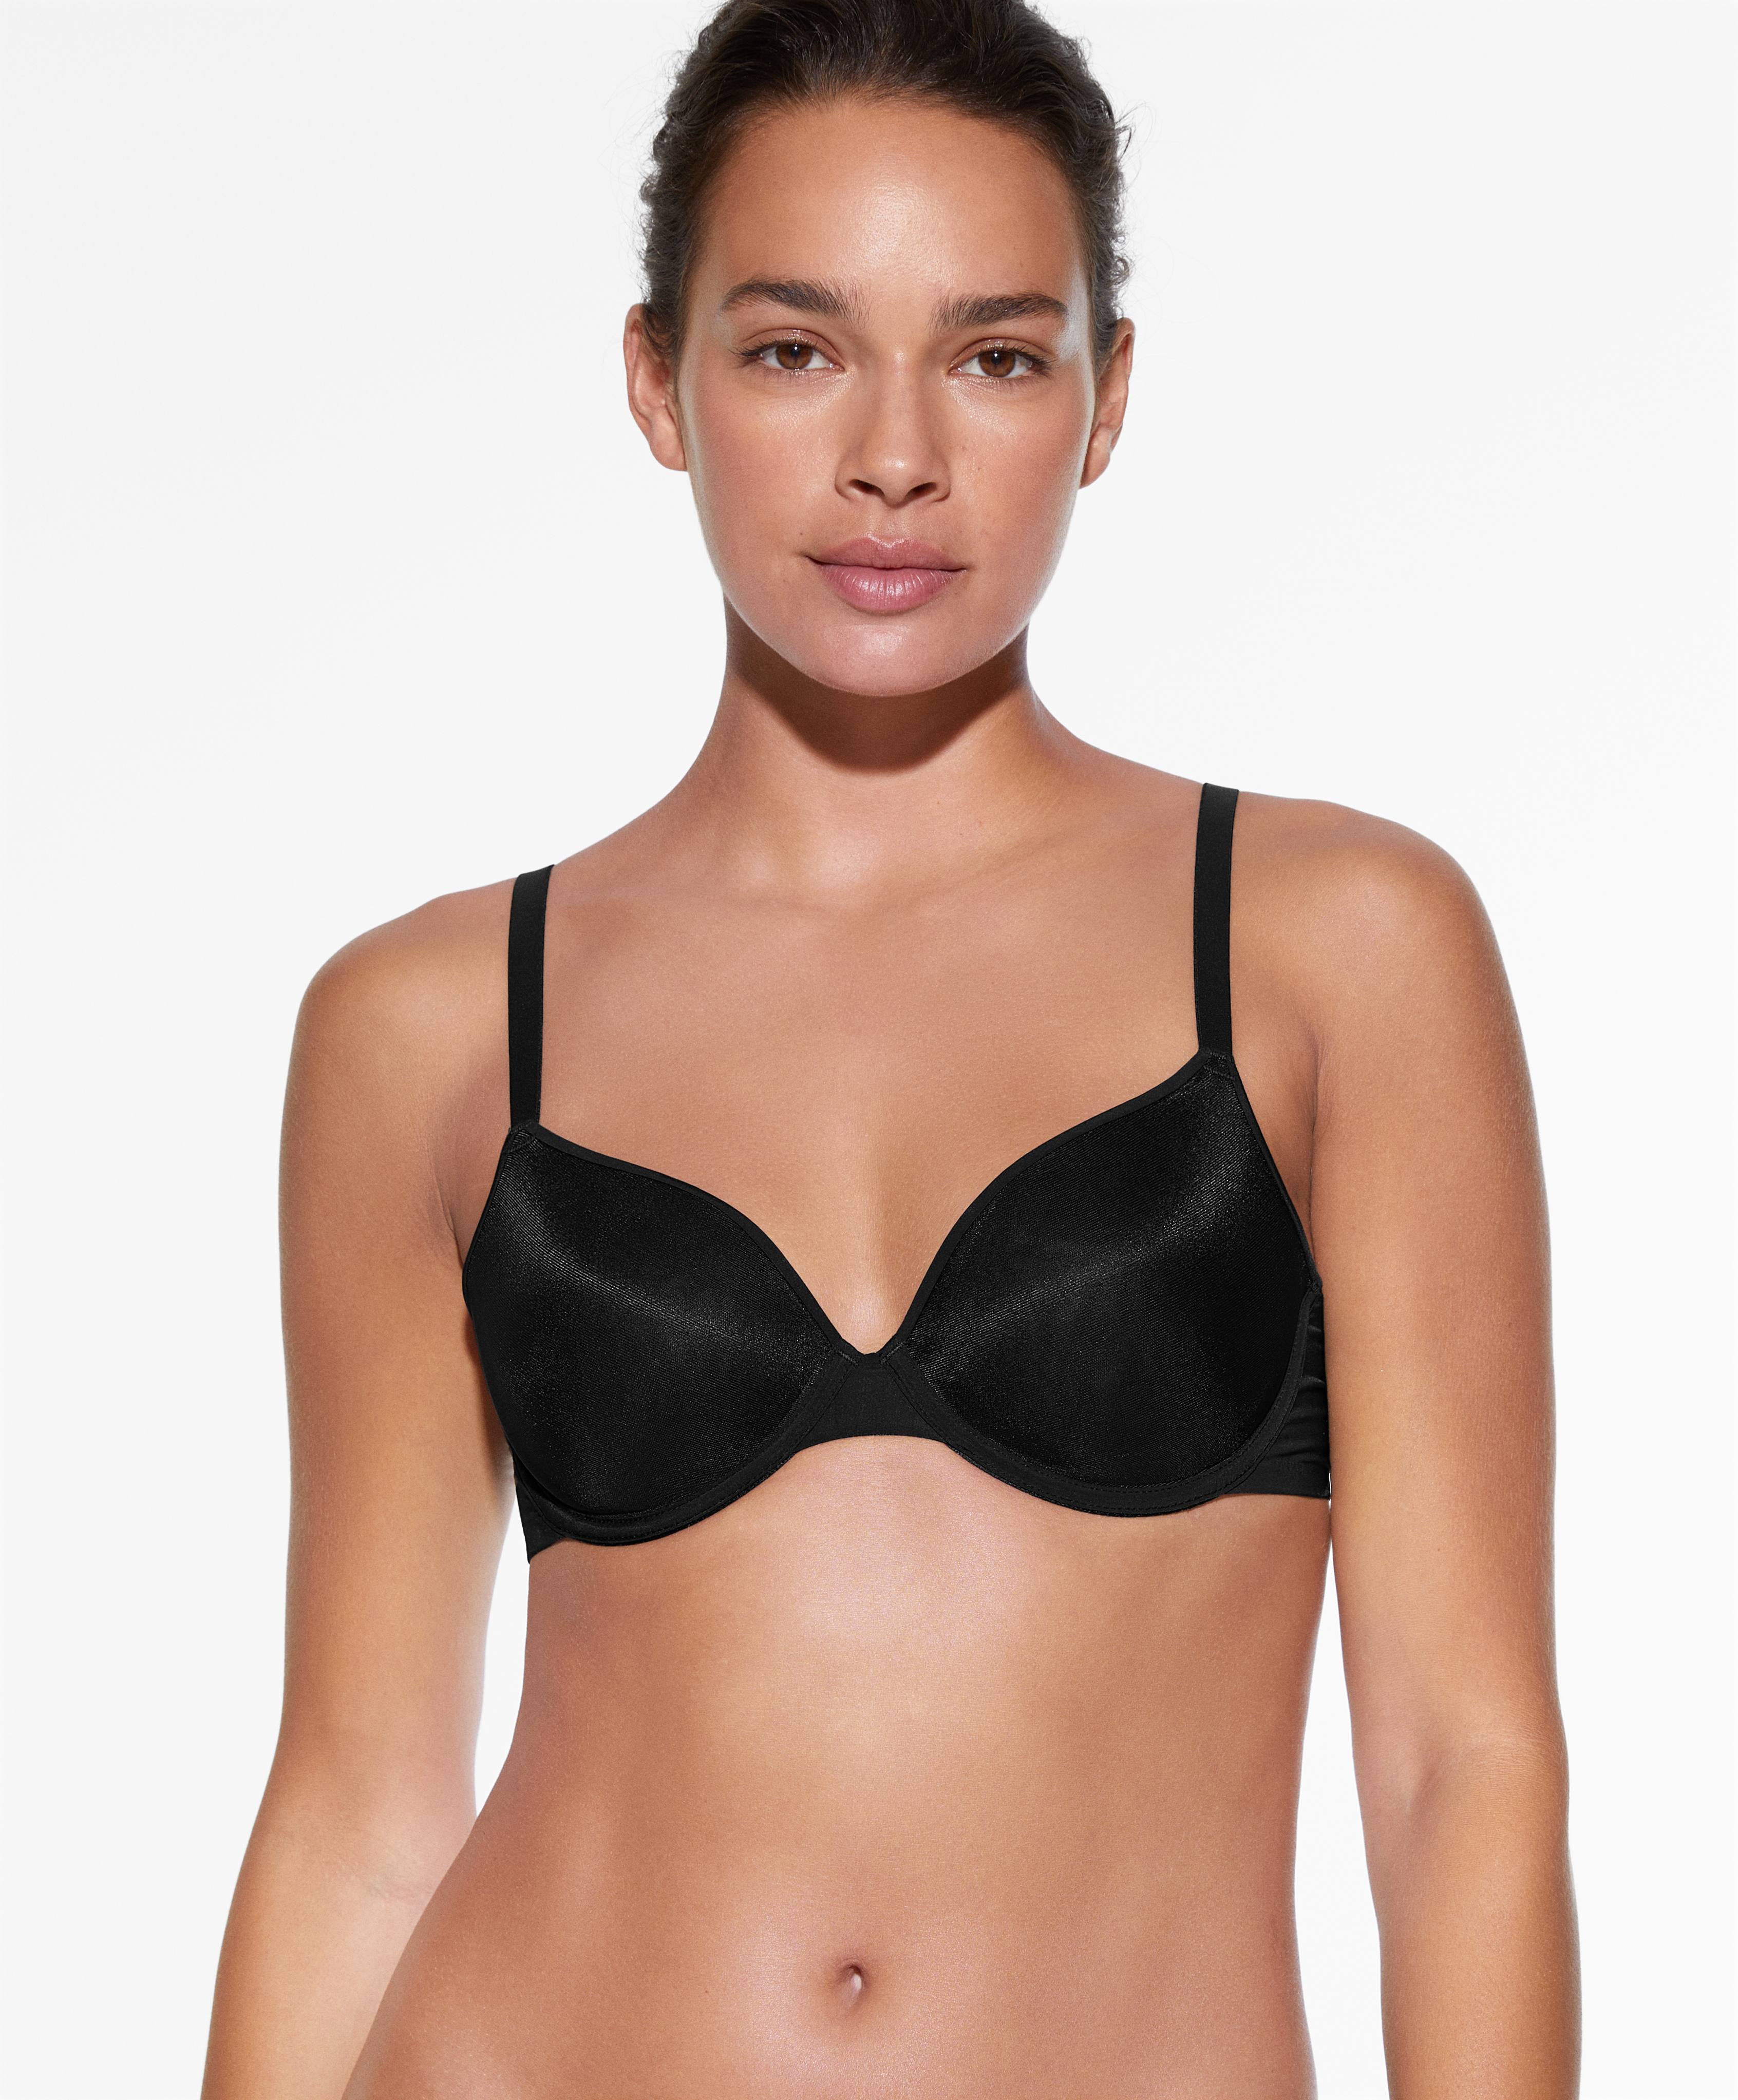 Buy Comfort Lace Bra from Next